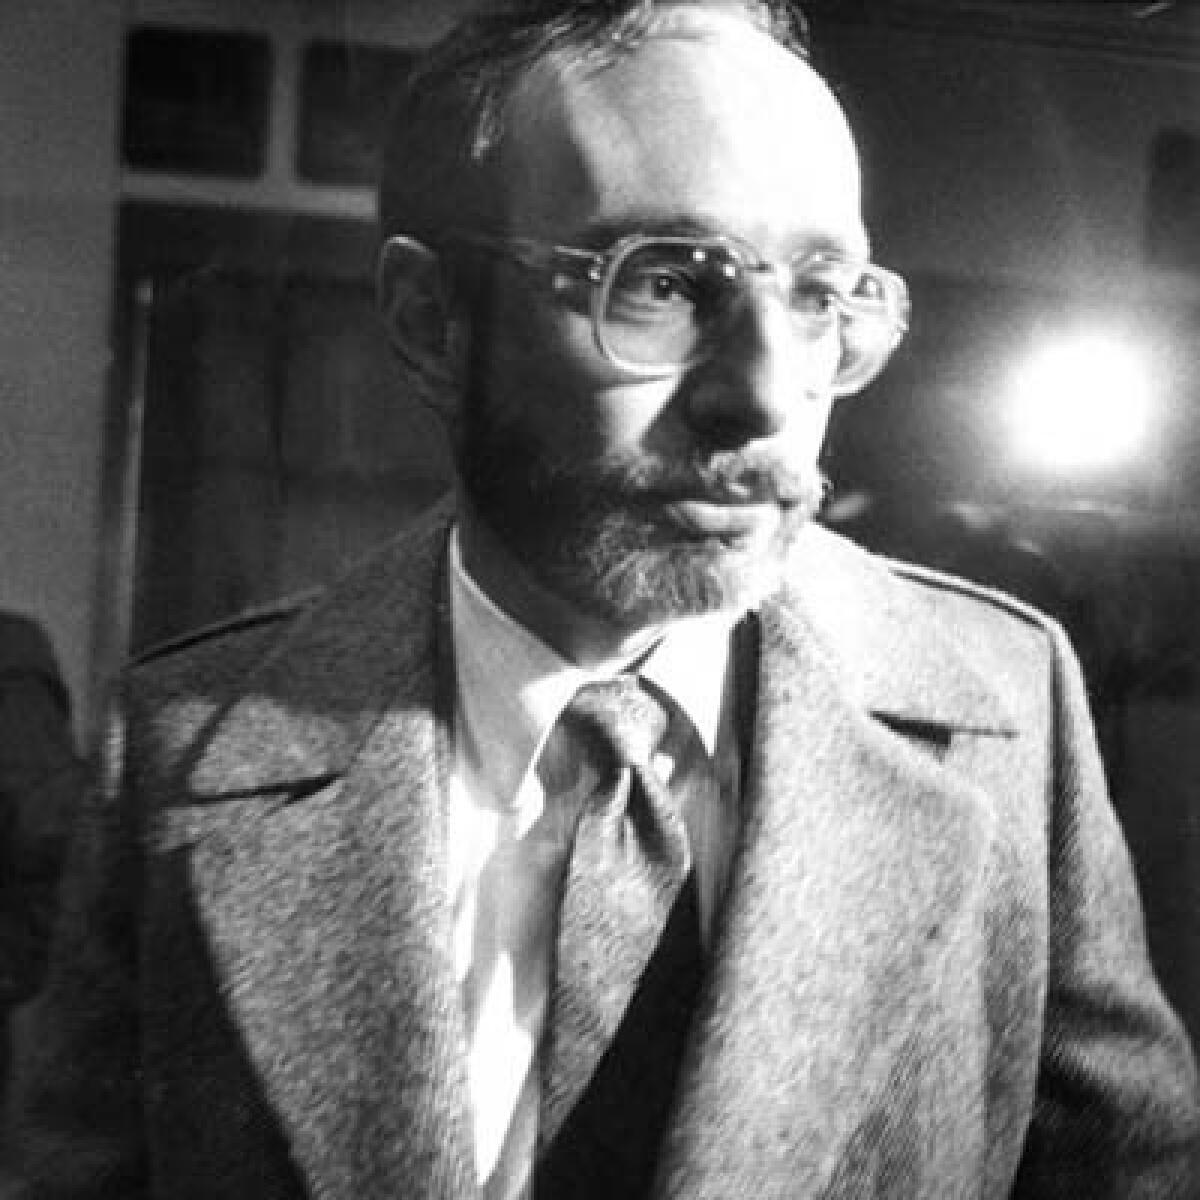 ** FILE ** Dr. Barnett Slepian leaves Amherst town court in this Jan. 3, 1989, file photo. In a November 2002 jailhouse interview with the Buffalo News, anti–abortion militant James Kopp admitted killing Slepian Oct. 23, 1998, because he provided abortions, but maintains he only intended to wound him. Kopp told reporters he picked Slepian's name out of a phone book and decided to make a public confession because he believes his supporters have been misled, and he wants them to know the reasons behindhis actions. (AP Photo/Buffalo News, James P. McCoy)